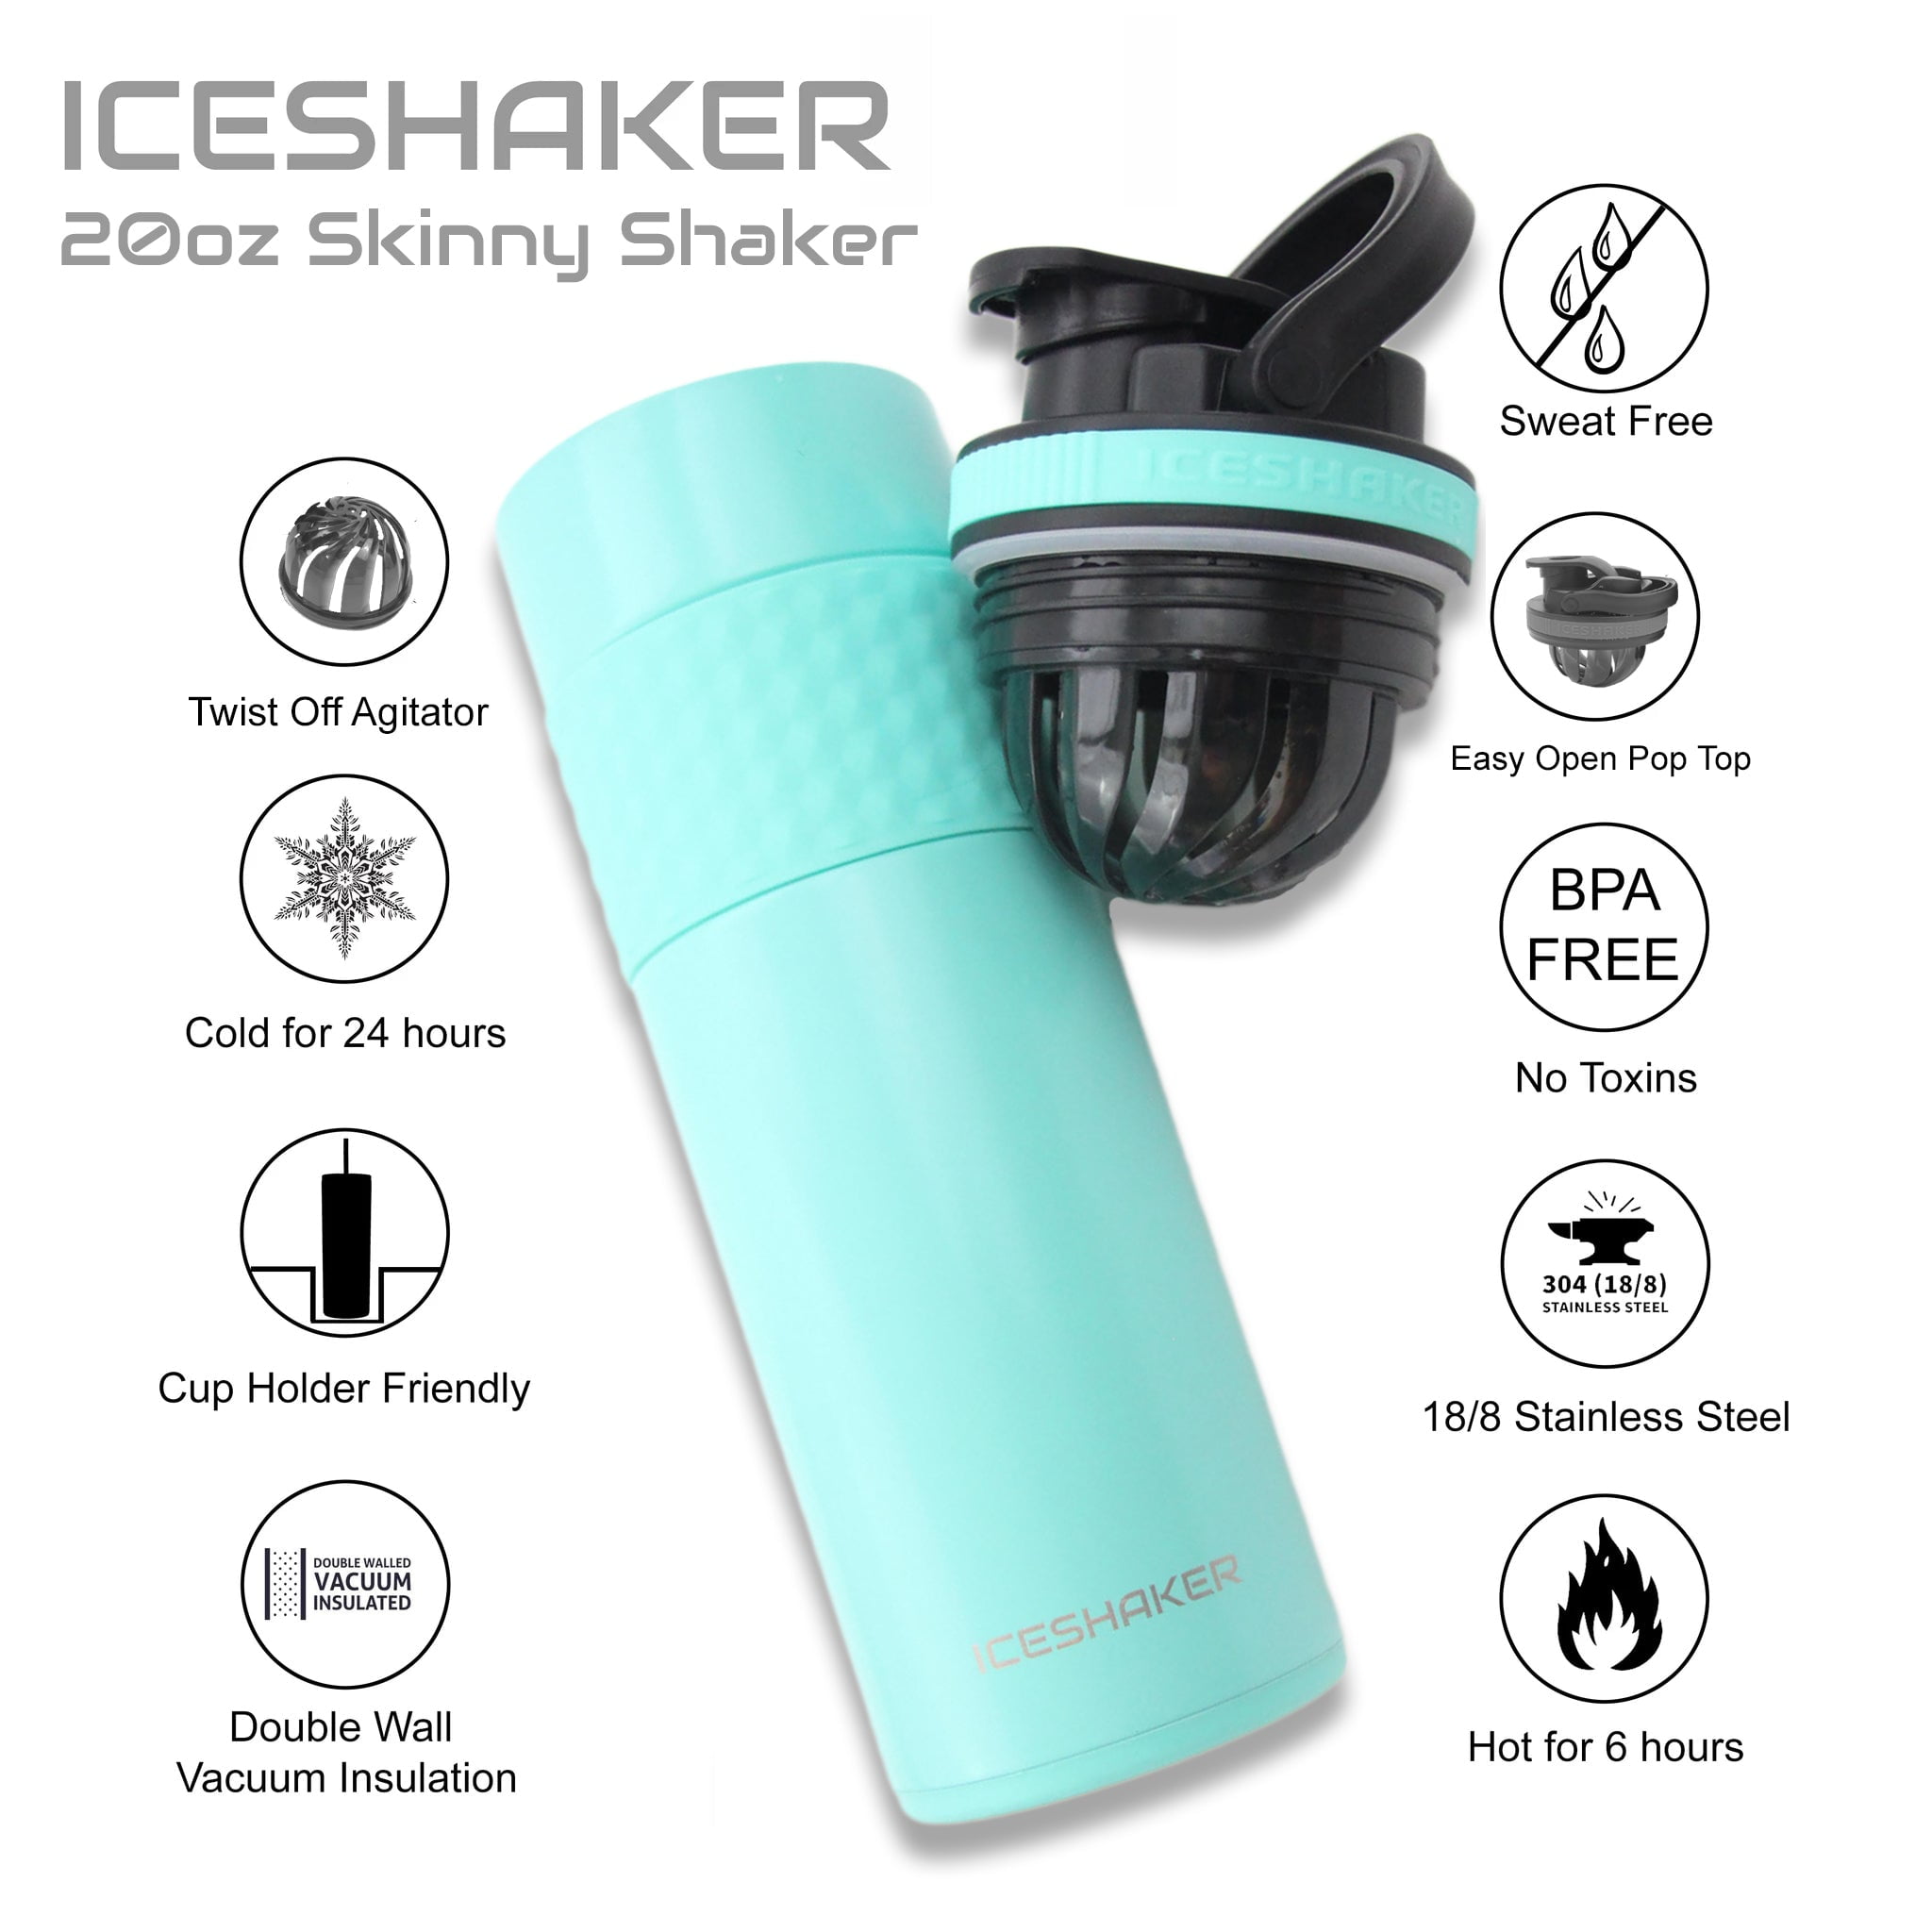 SkinnyFit Super Shaker Bottle 20oz. BPA free with Mixing Grid Technology,  Leak Proof, Cup Holder Compatible